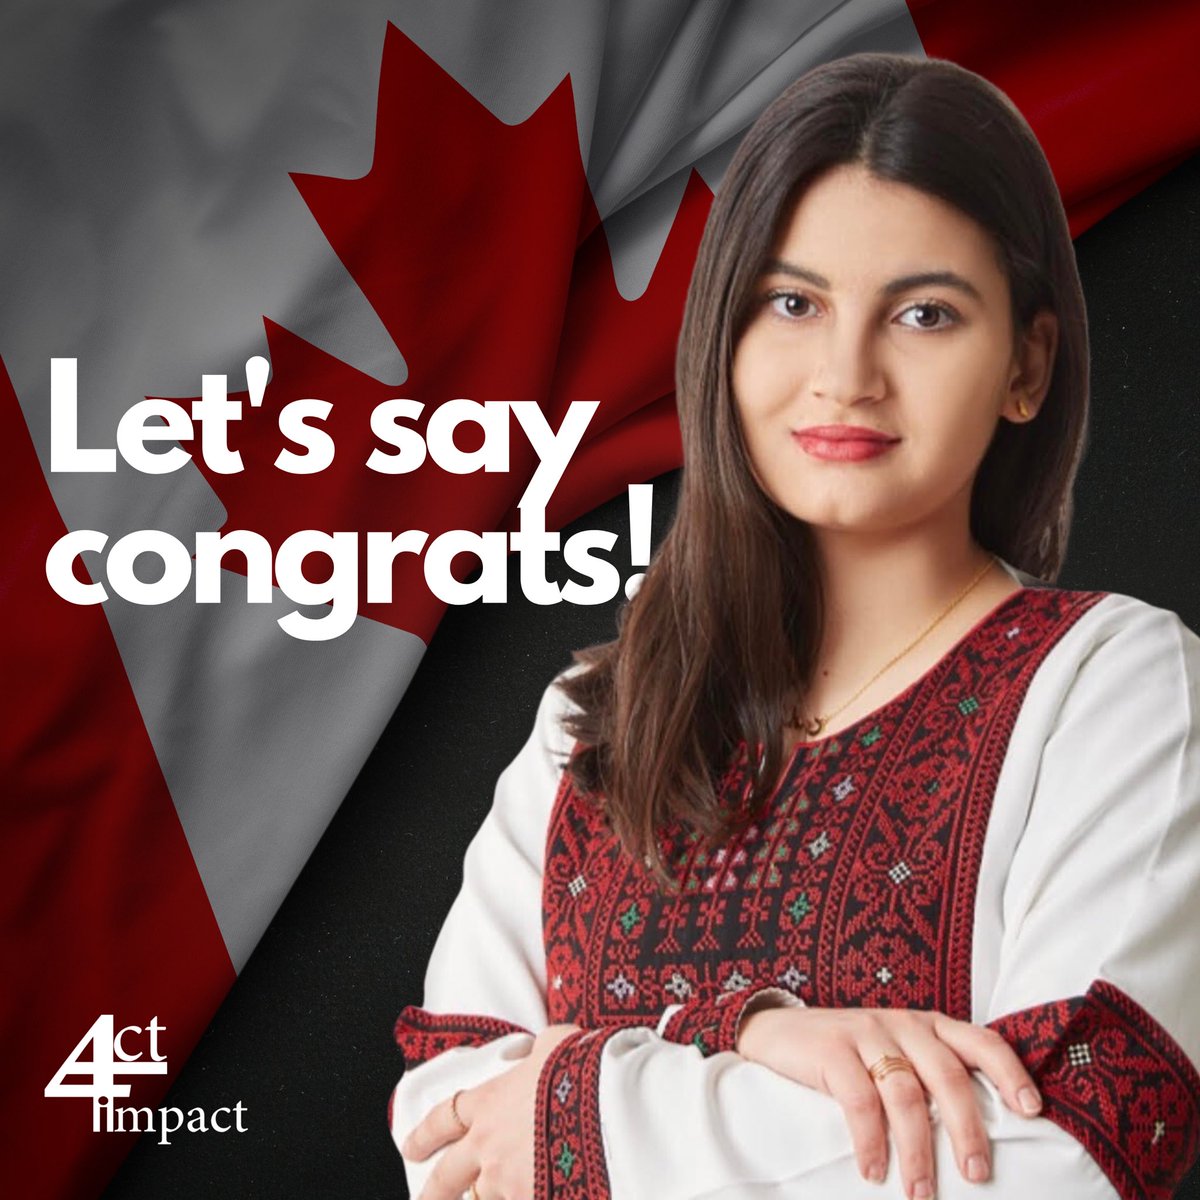 Our very own board member, Salma, has been accepted into the SL Program, a unique #political #internship #opportunity that offers a diverse and fast-paced work experience. Salma will learn from political staff and contribute to the work of Canadian MP, #Arielle Kayabaga 🇨🇦